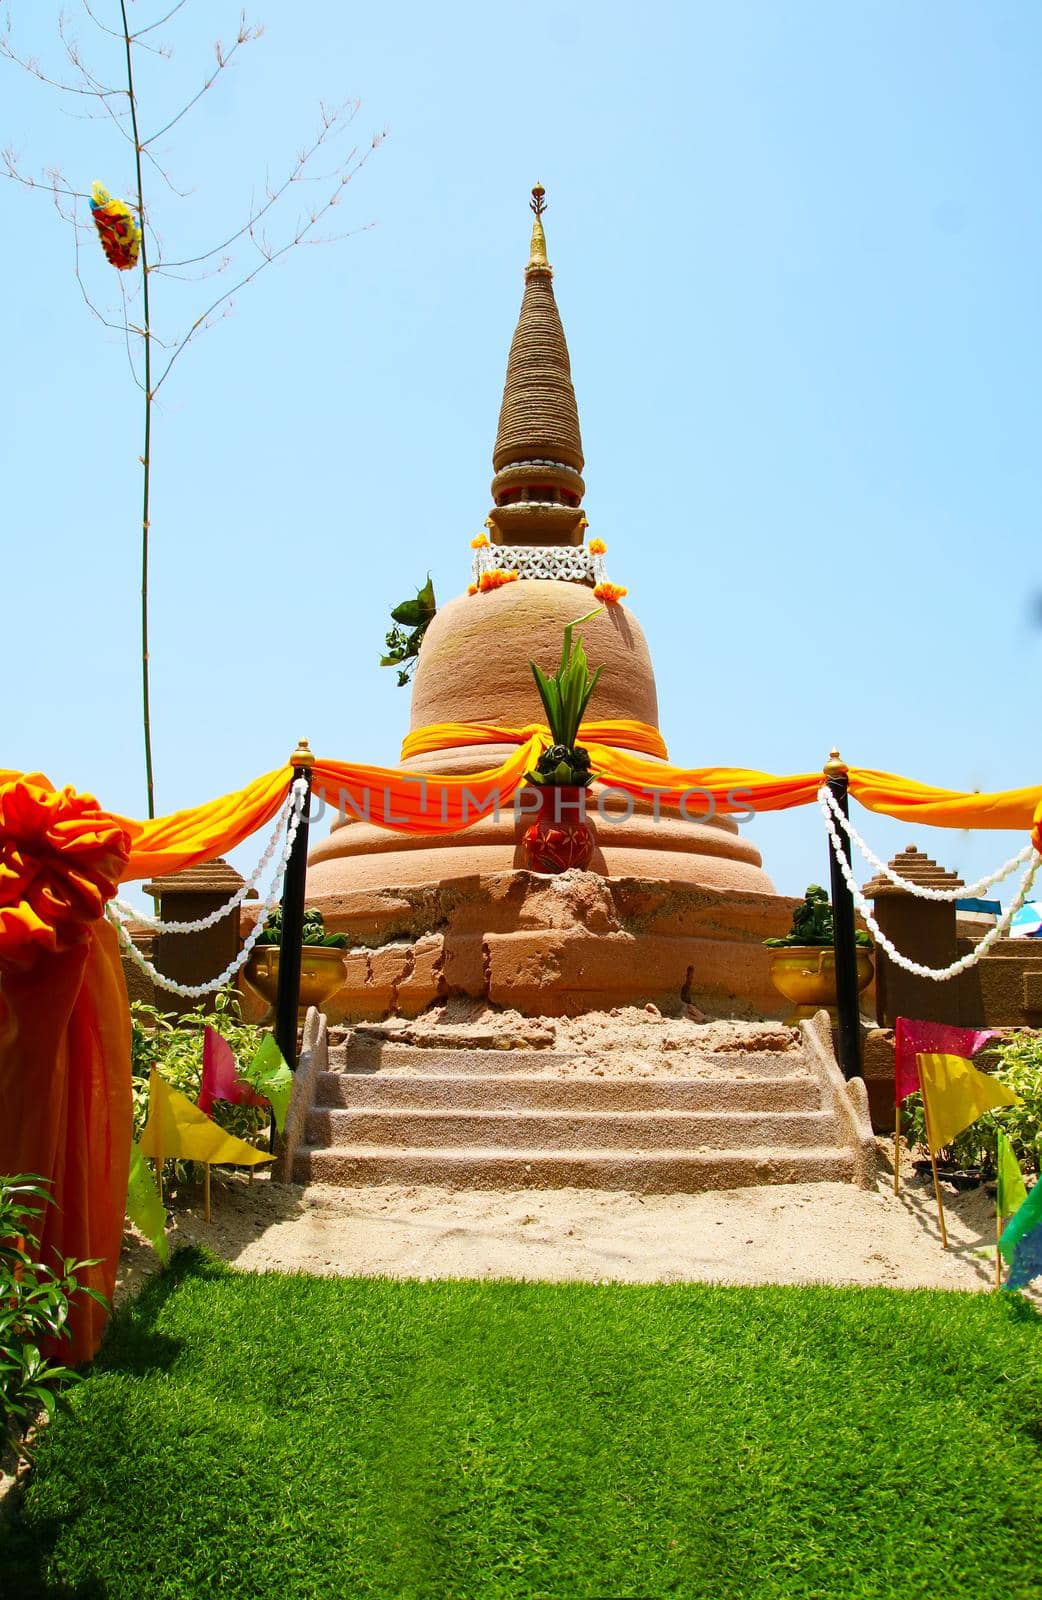 sand pagoda on green grass was carefully built, and beautifully decorated Songkran festival by Darkfox